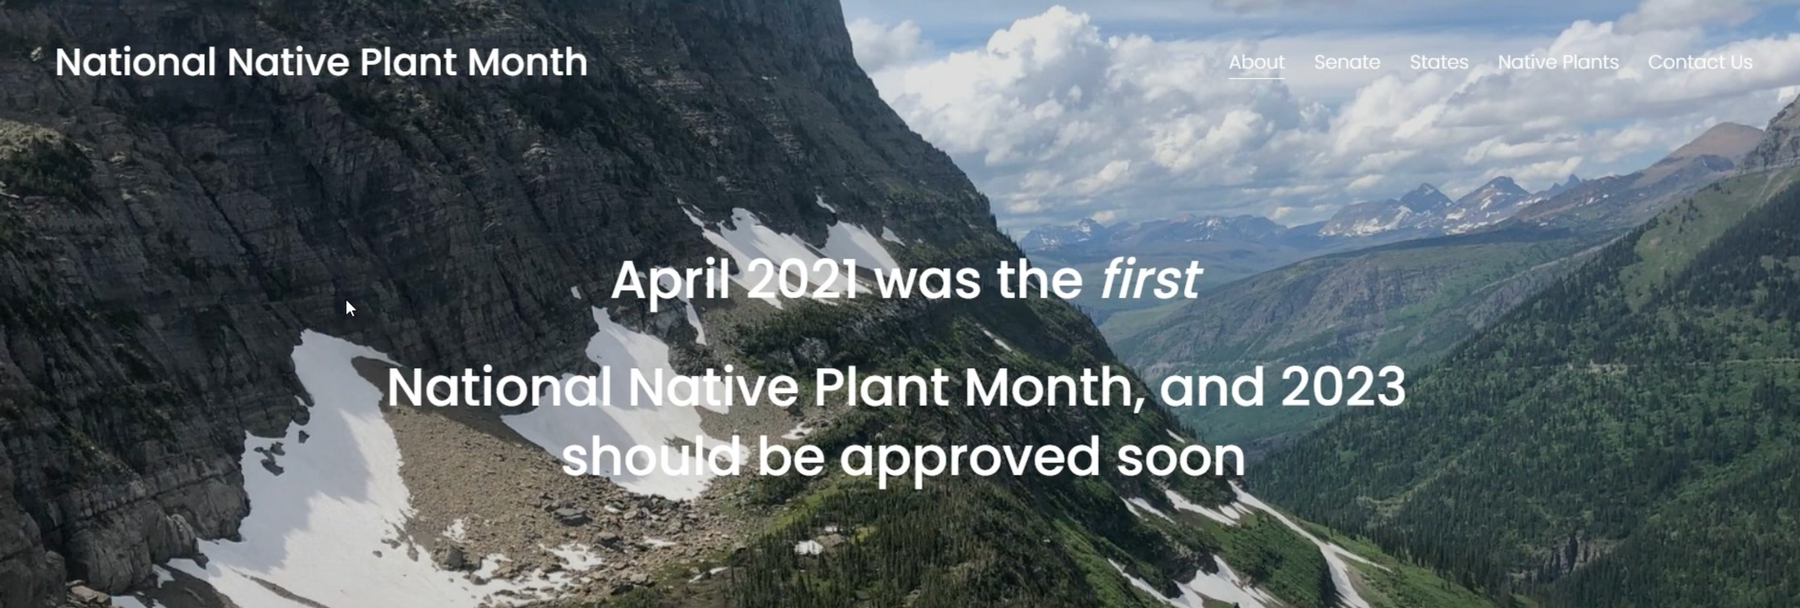 National Native Plant Month Video